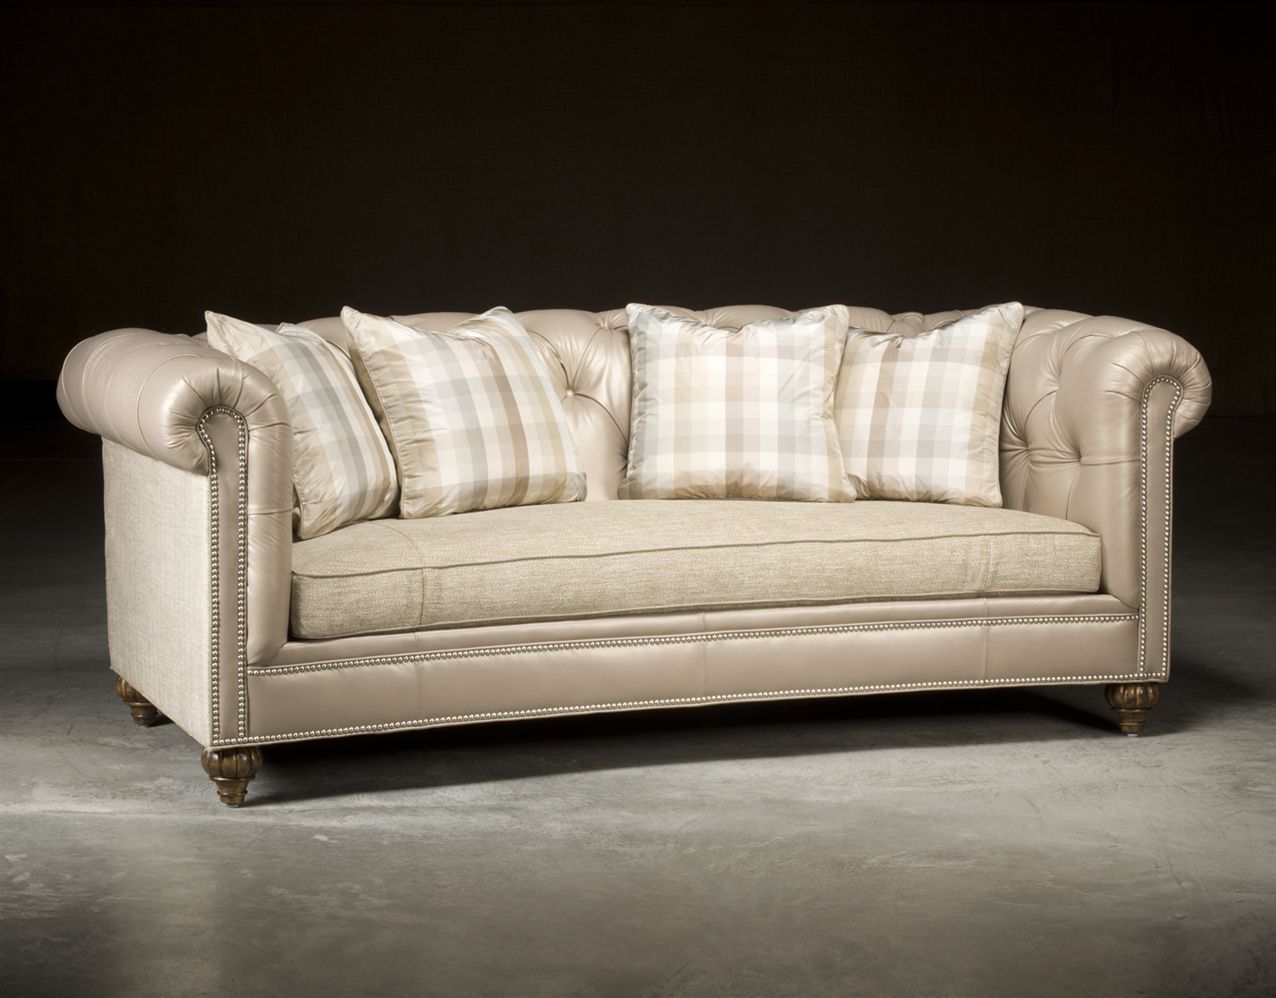 Chesterfield Tufted Sofa, High End Upholstered Furniture Inside Tufted Upholstered Sofas (View 10 of 20)